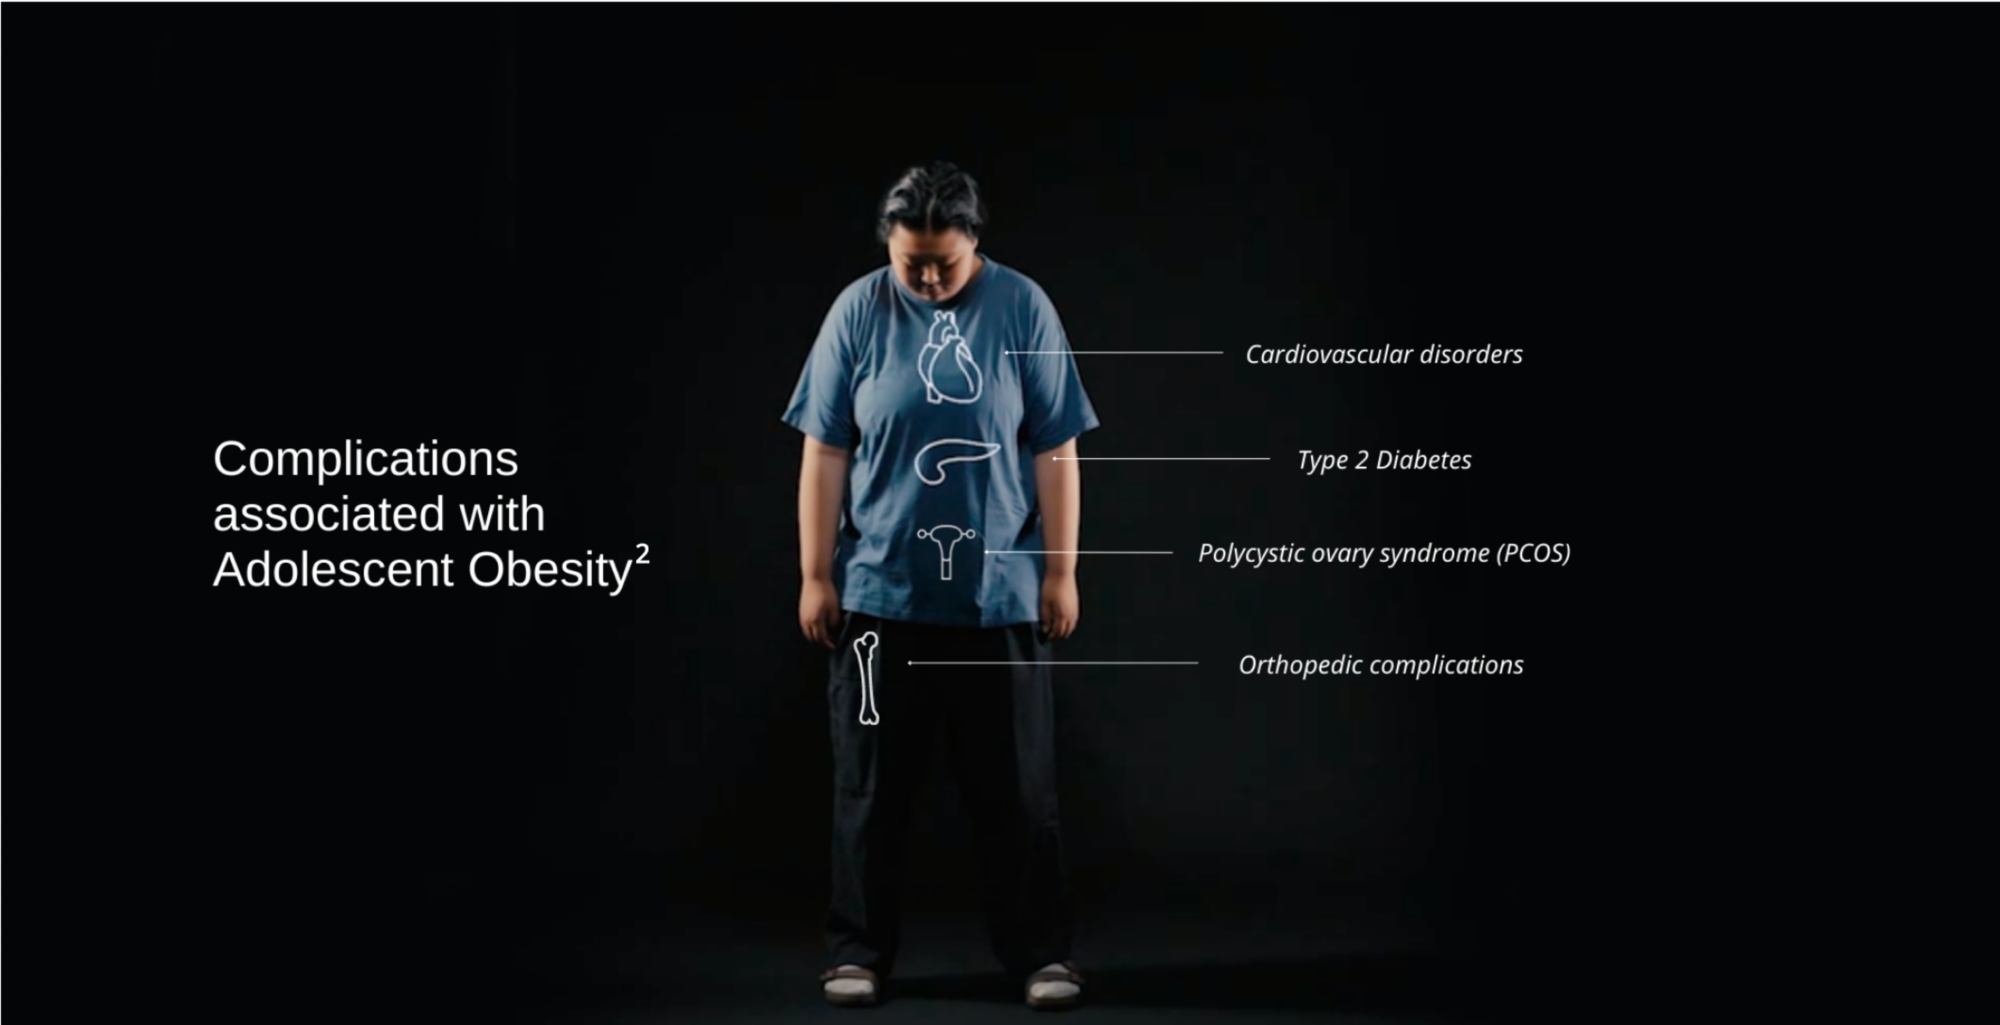 Complications associated with Adolescent Obesity